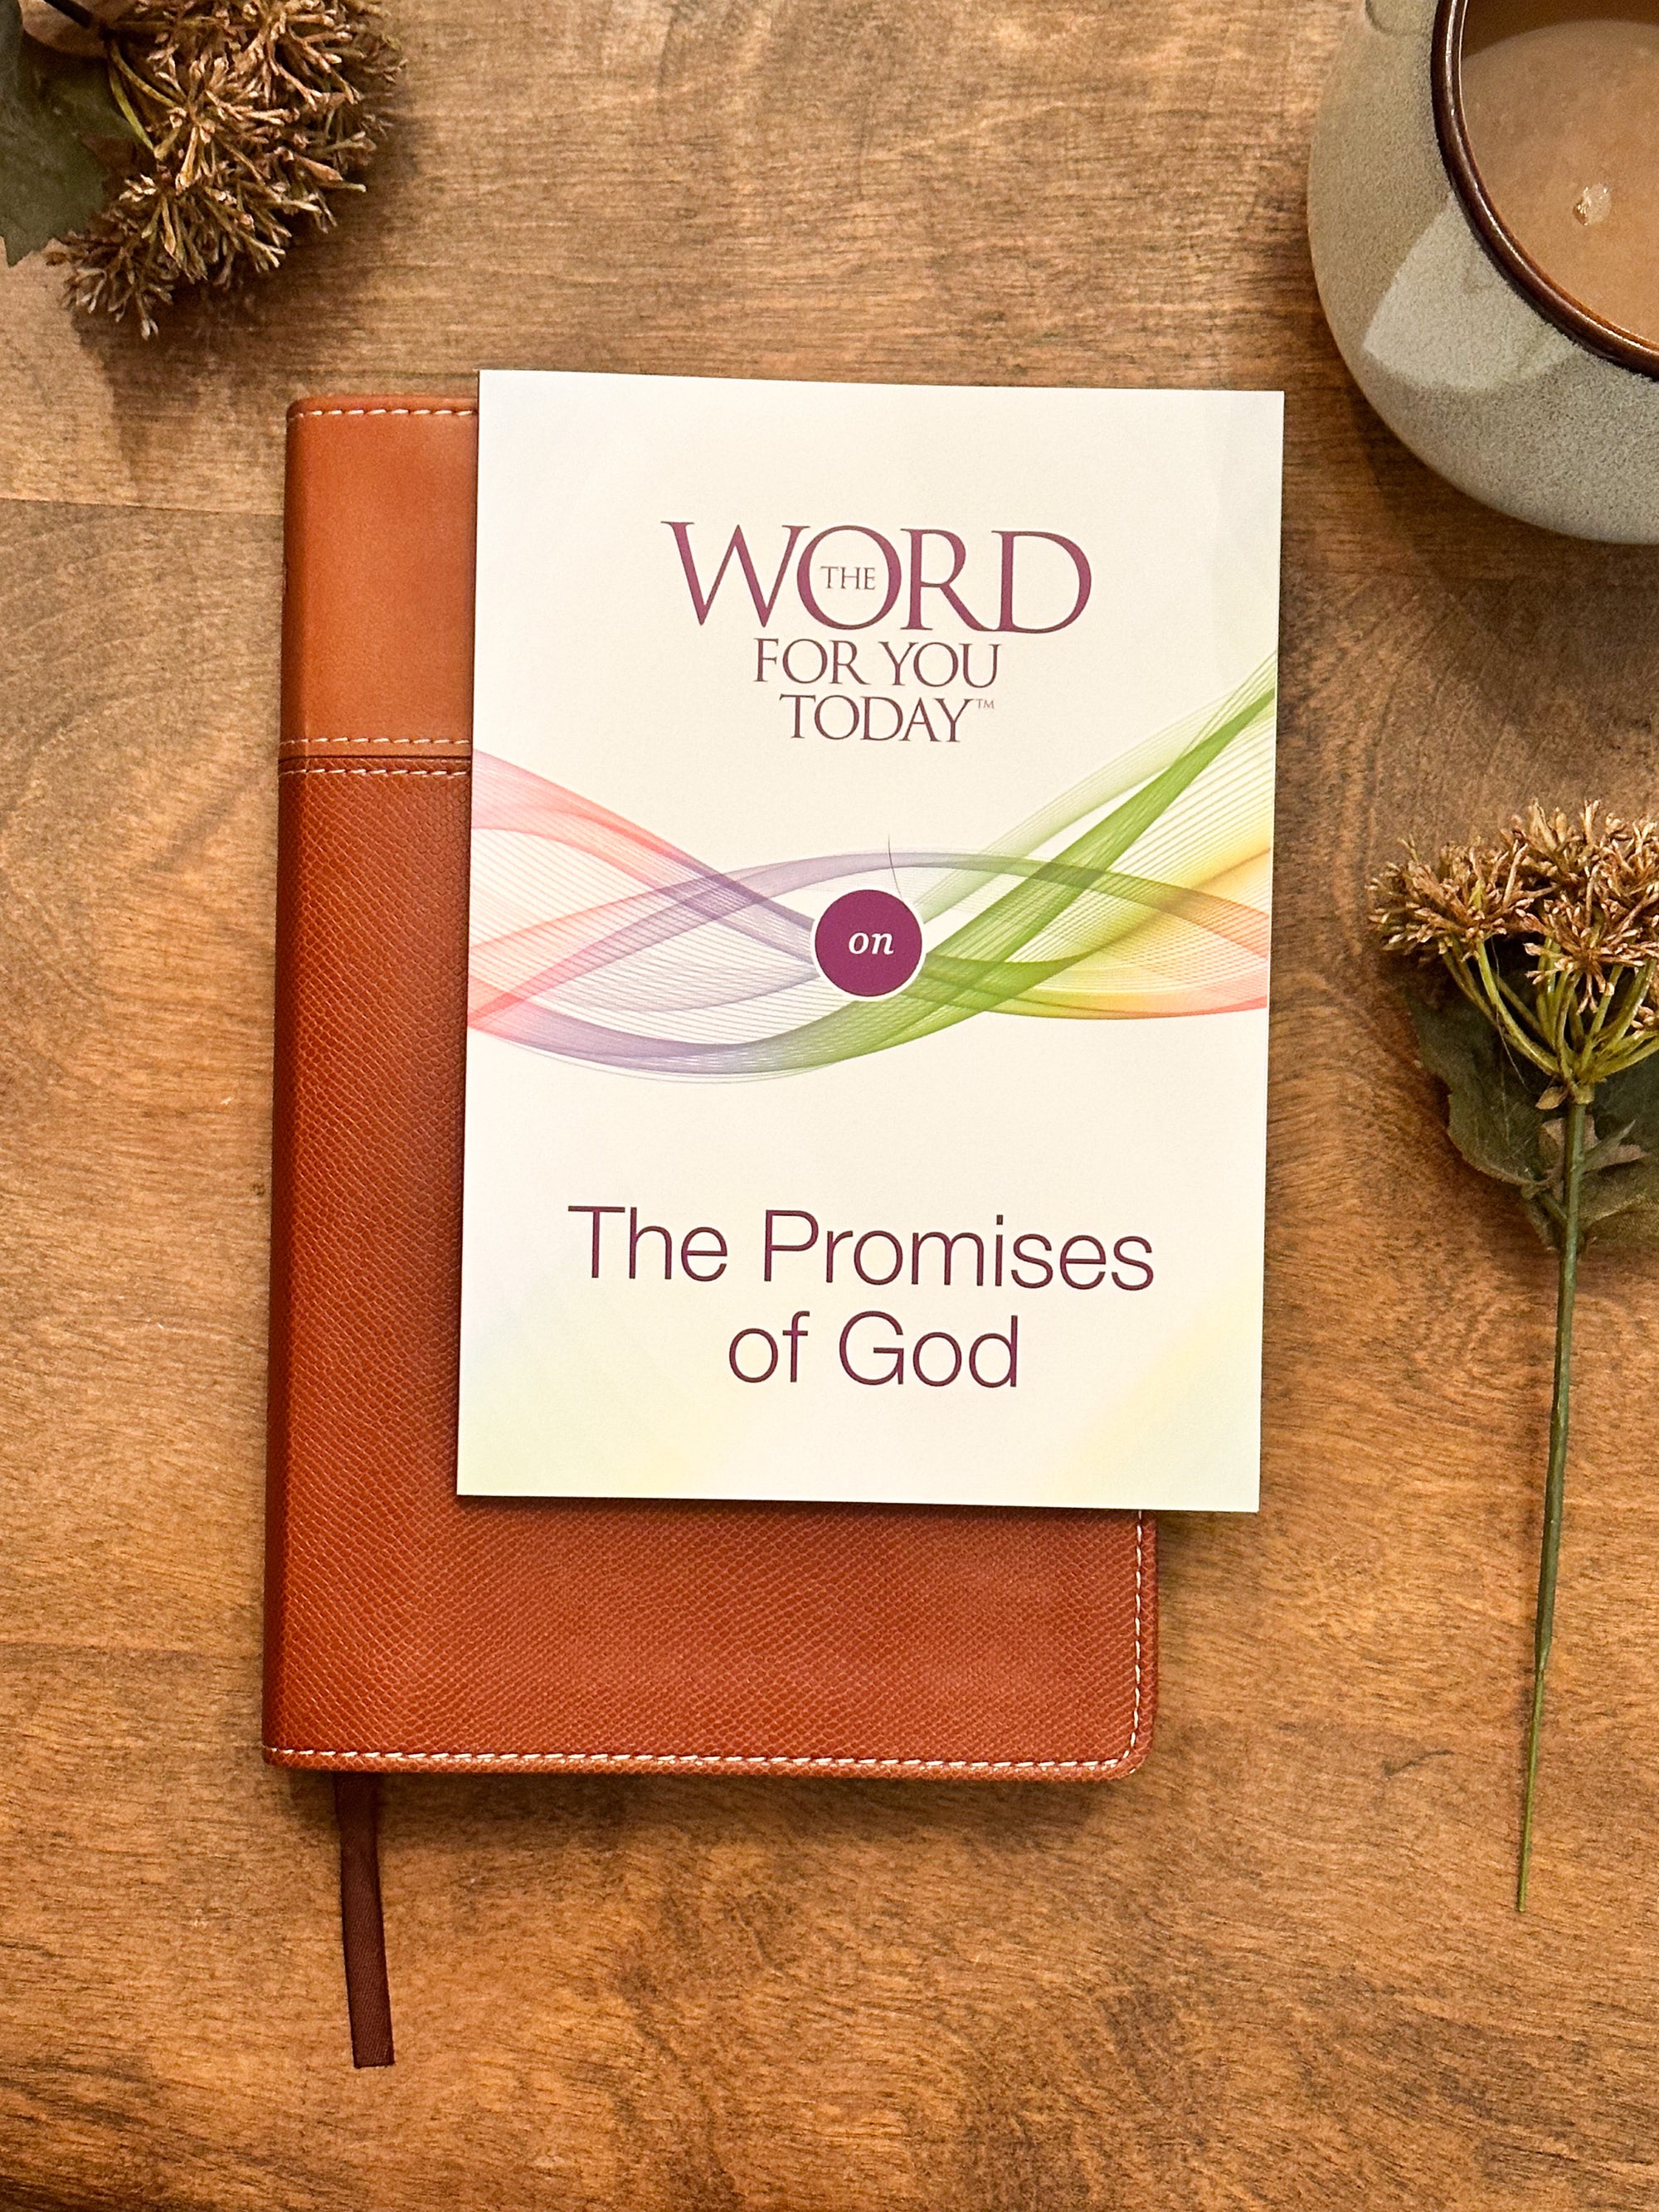 The Word For You Today on Promises of God